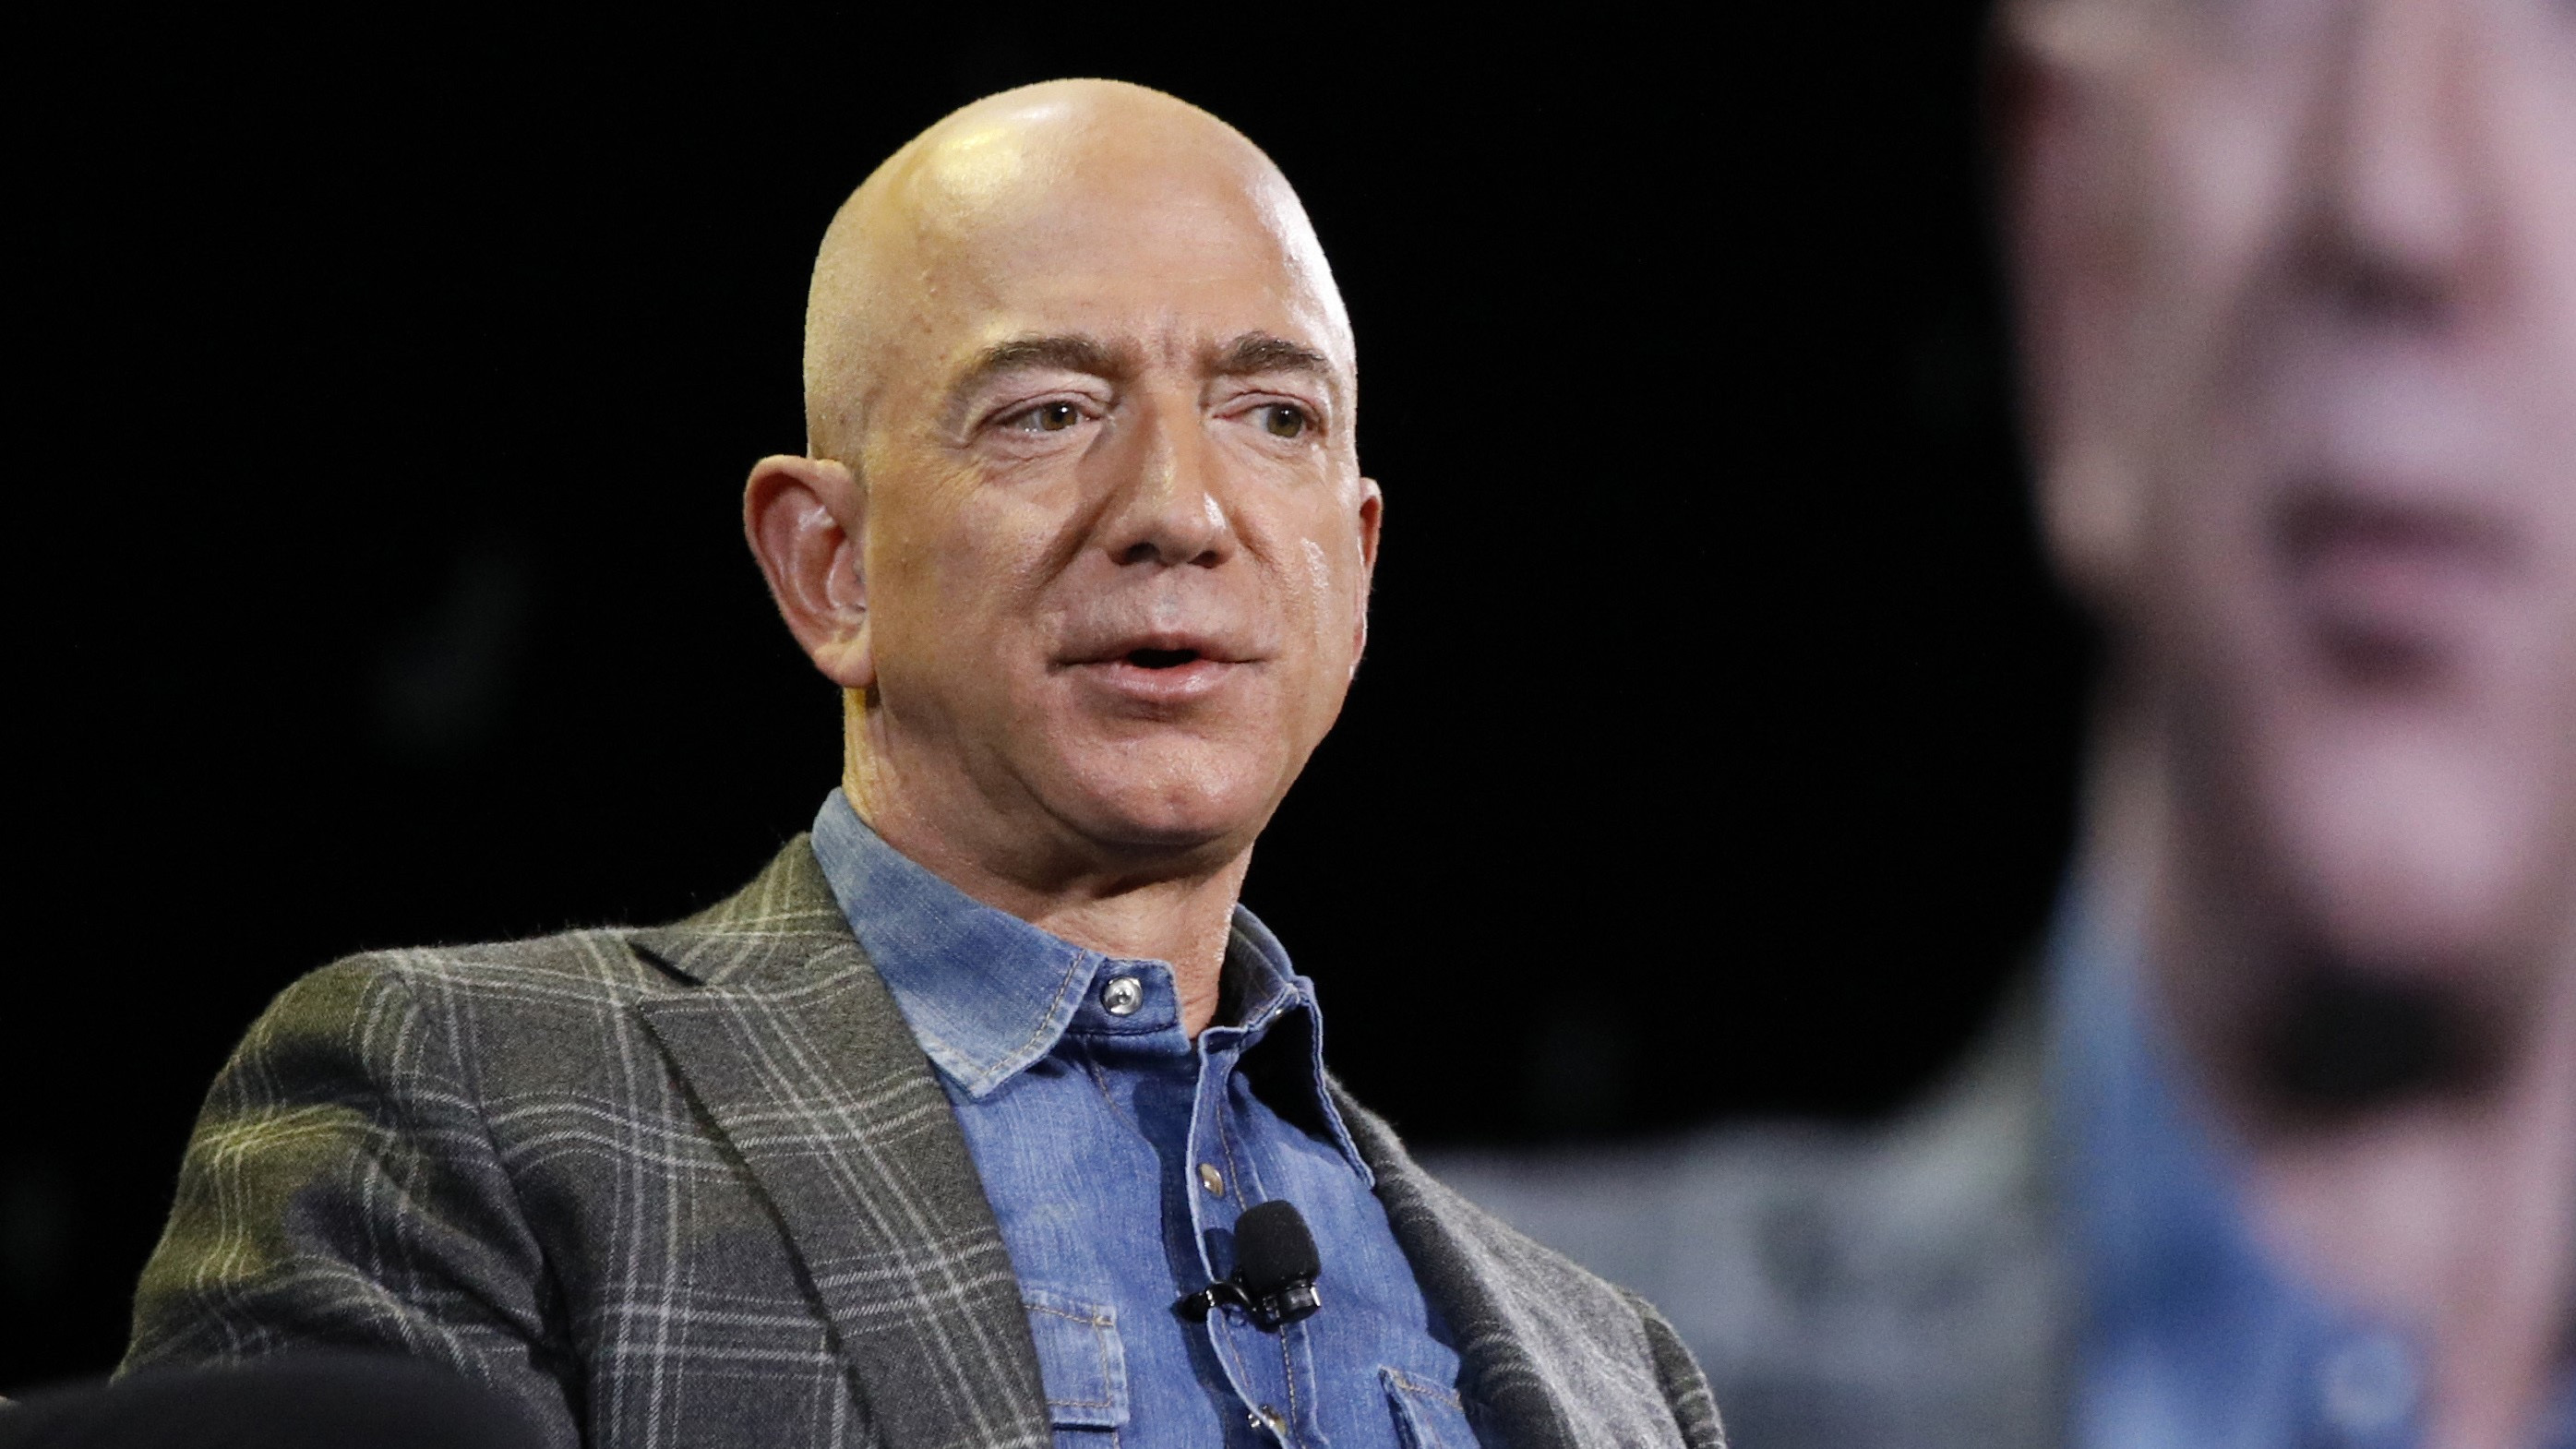 Jeff Bezos Is Once Again The Richest Person In The World After Two Weeks At No. 2